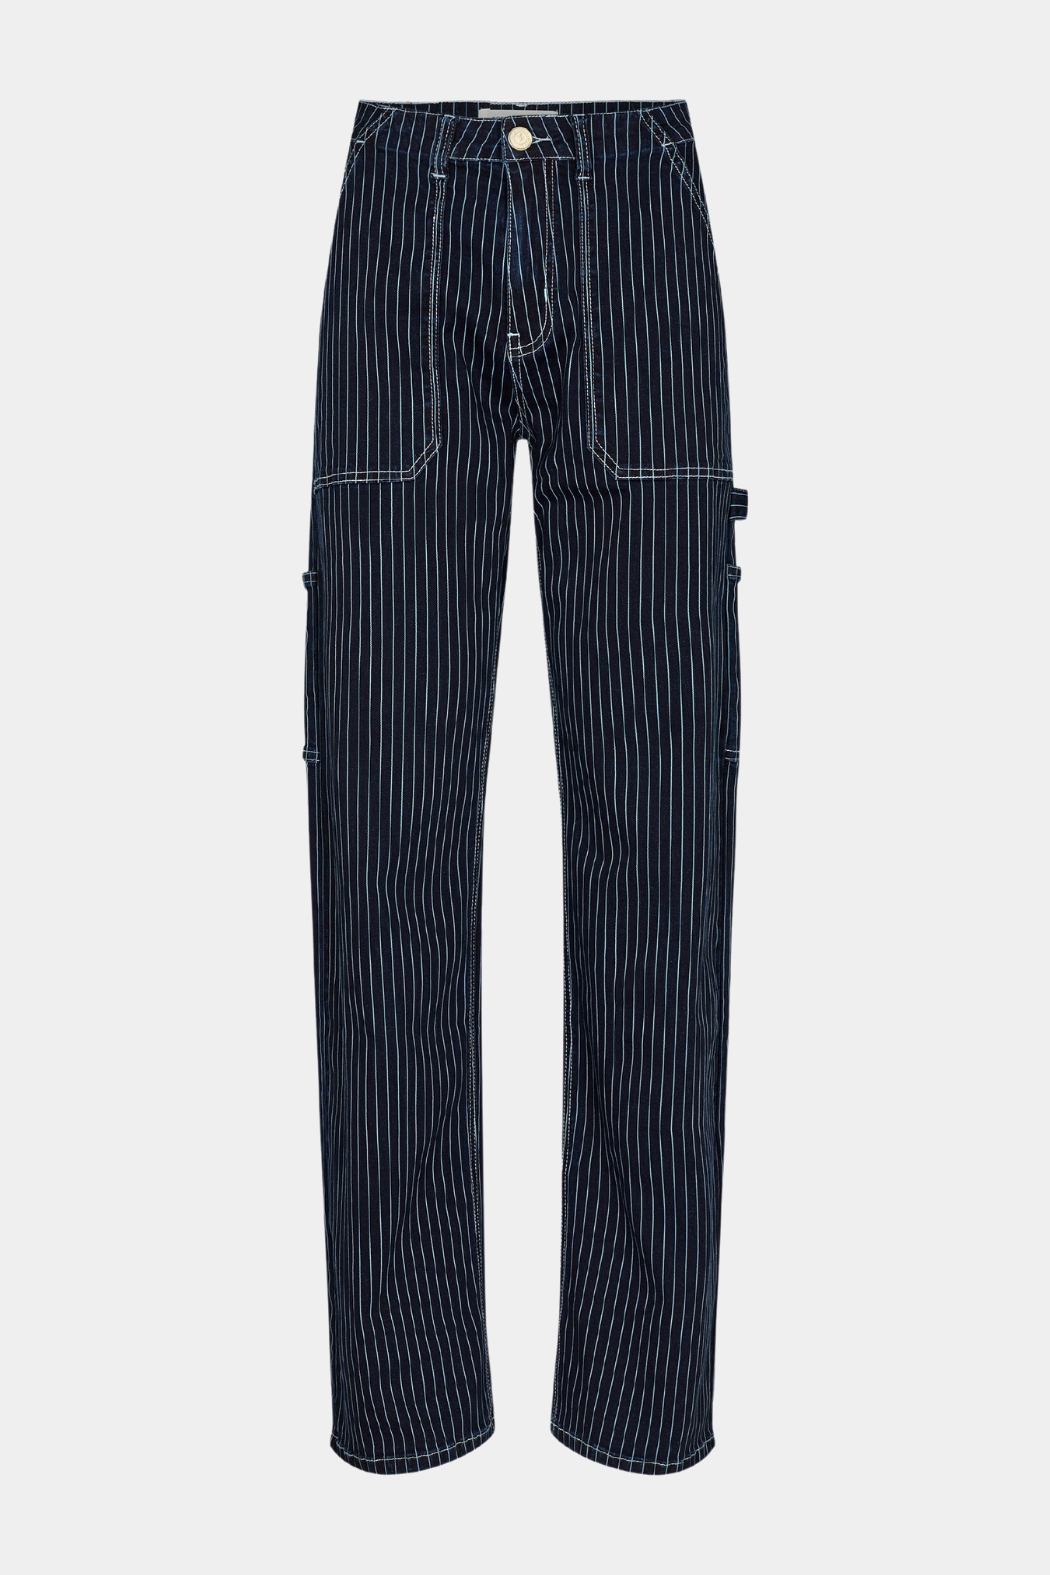 S231348 Trousers